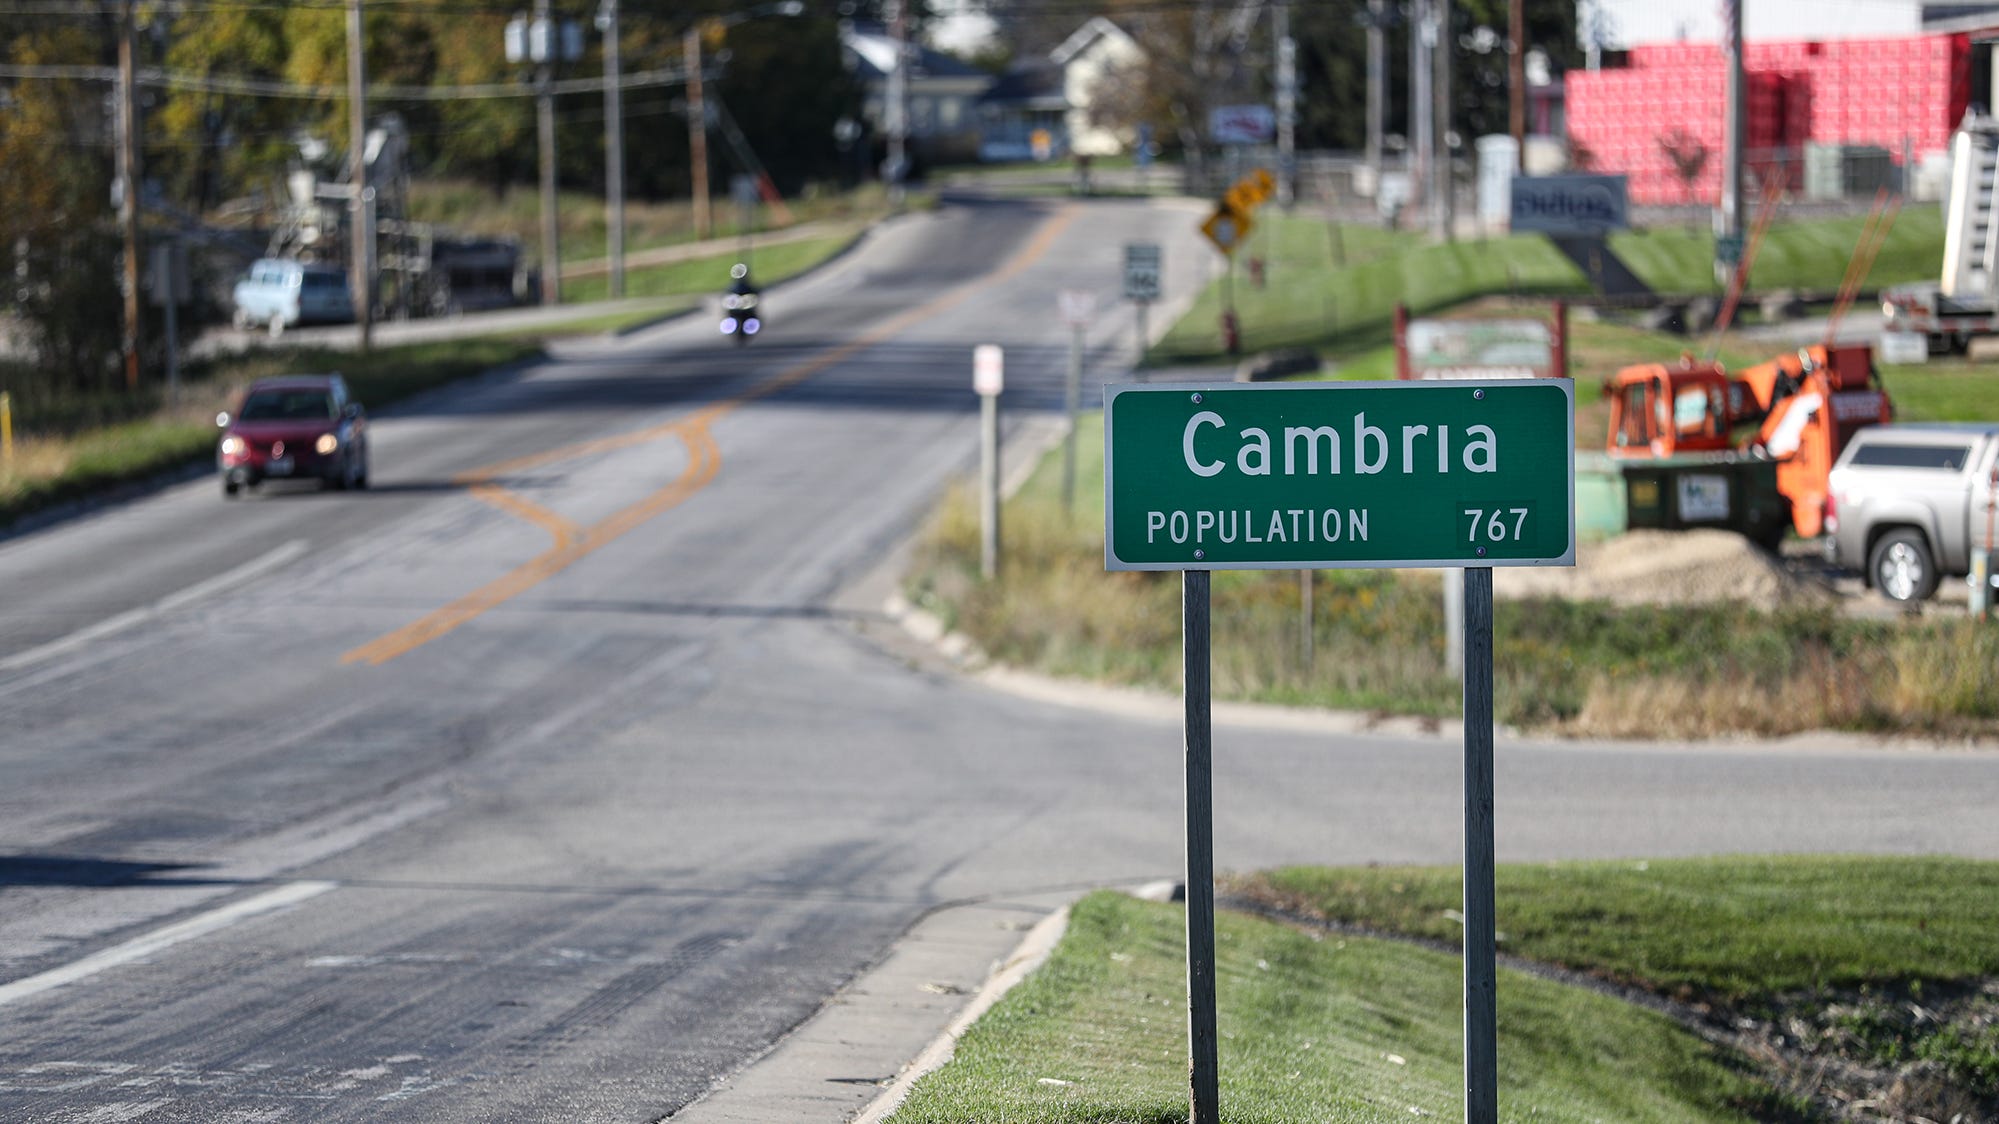  Residents shocked band of men trained in Cambria for governor kidnapping plot 